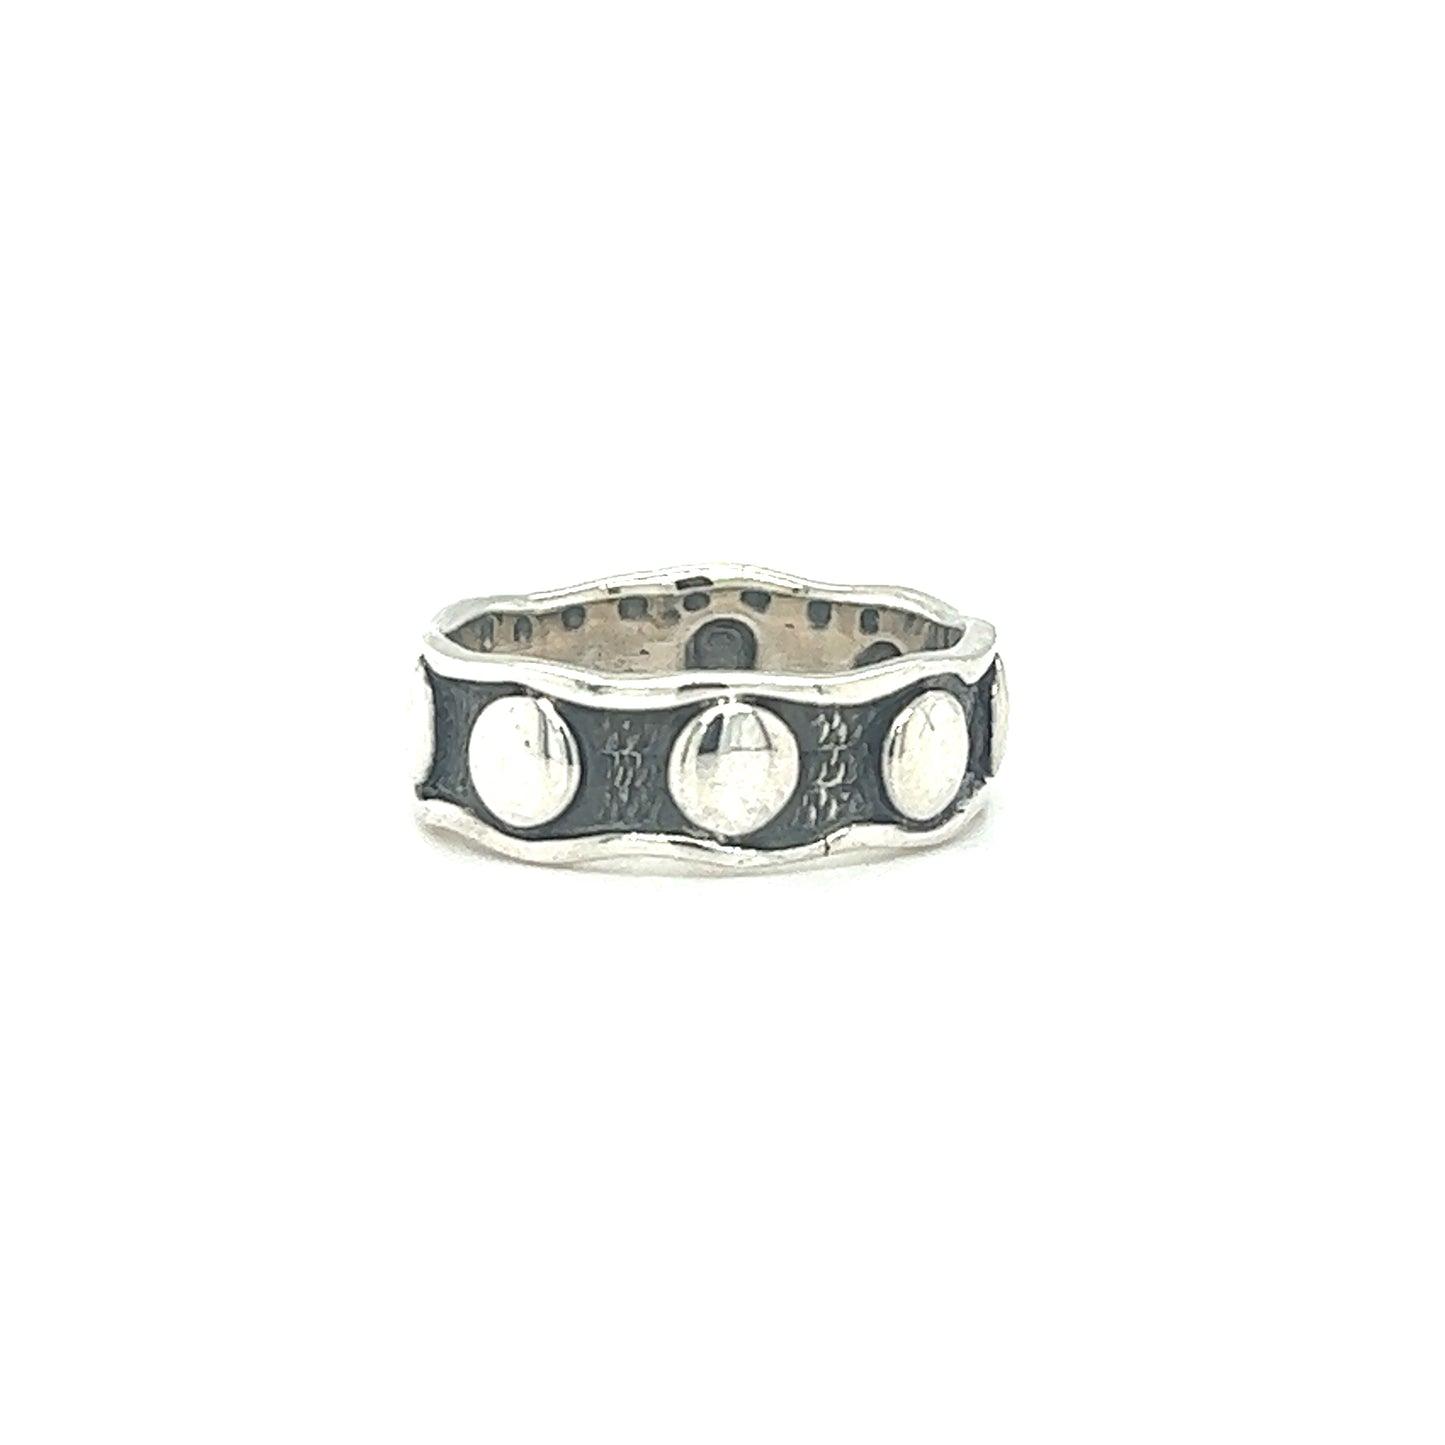 A Super Silver Edgy Curvy Band with Circle Pattern ring.